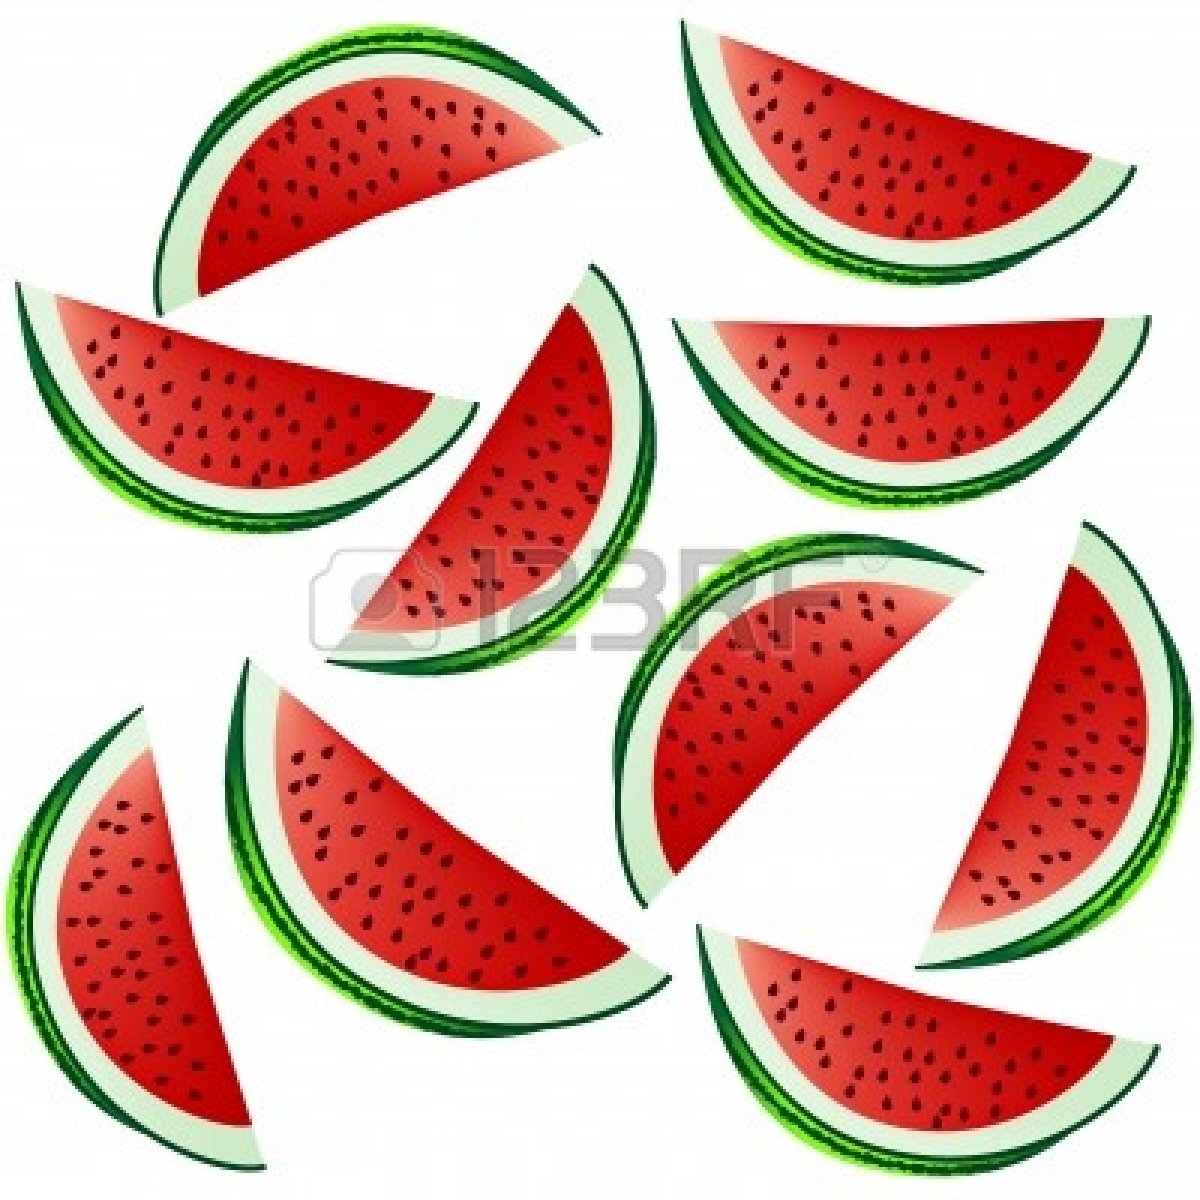 Cute Watermelon Background 9930819 Seamless Background With Watermelon    